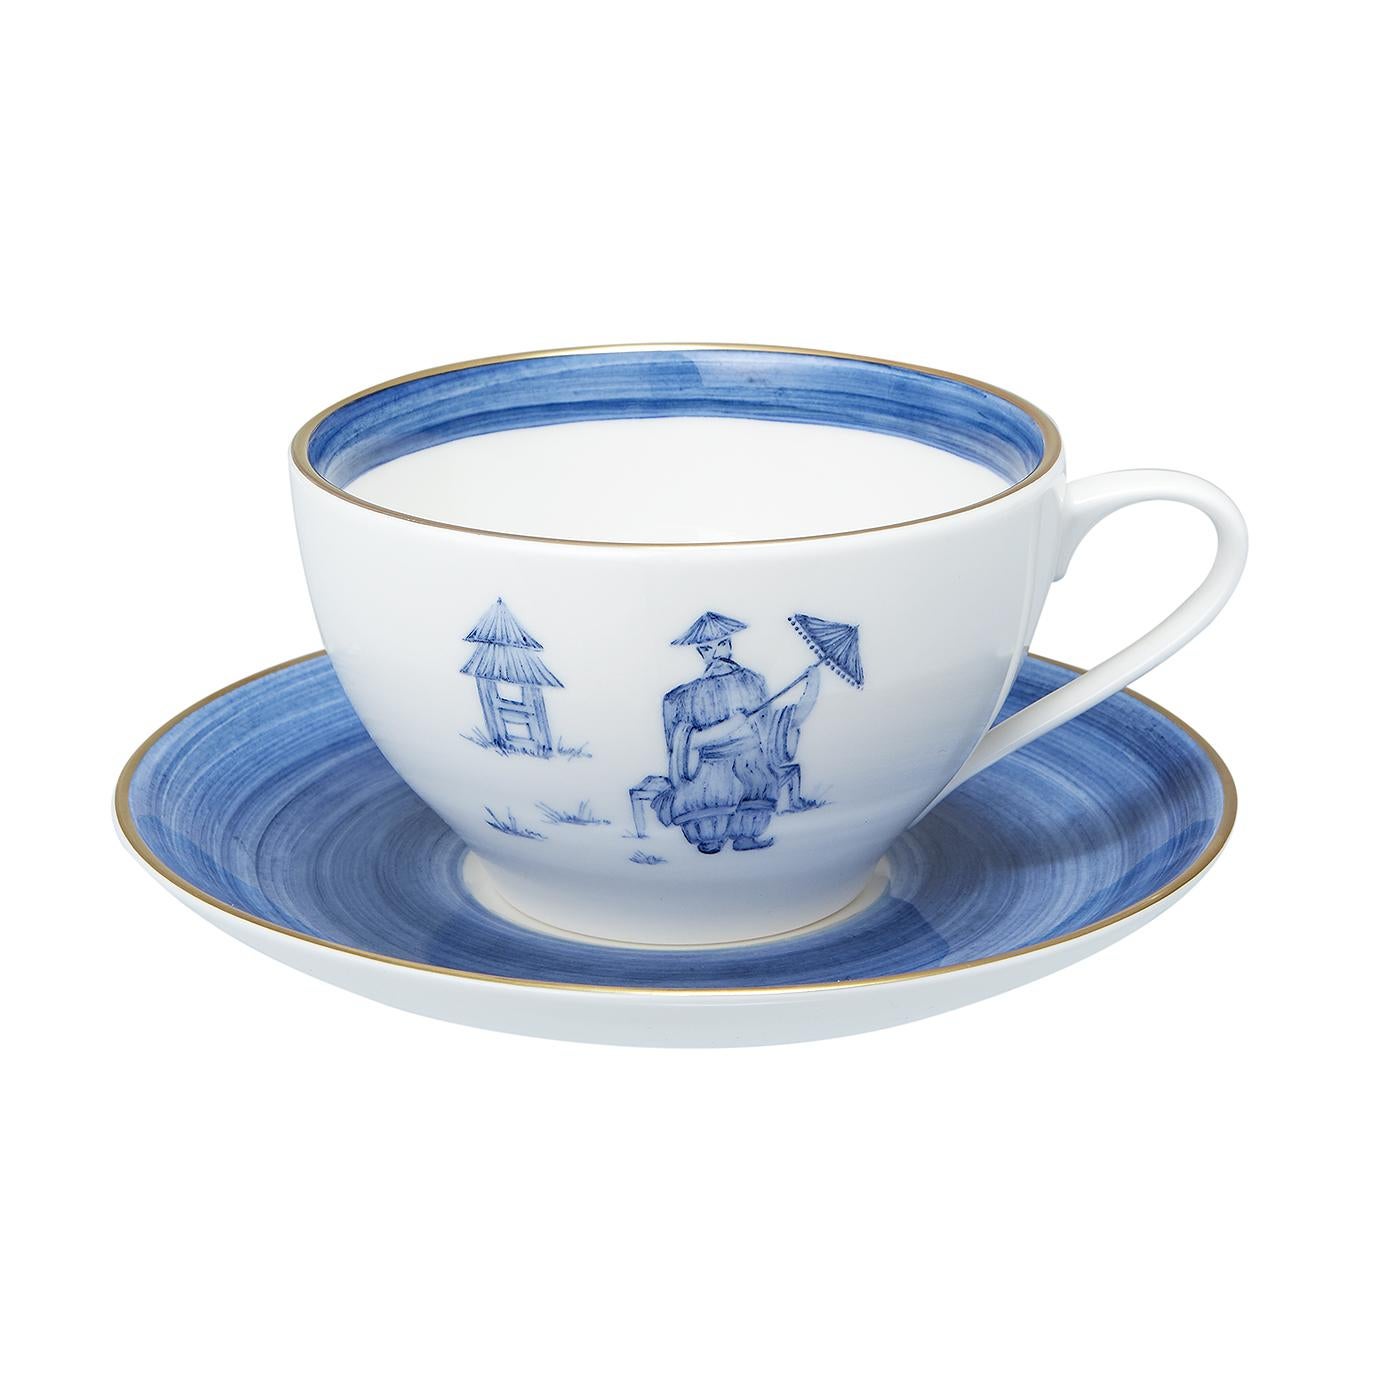 These completely handmade porcelain cups with saucers are painted by hand with a charming hands-free chinoiserie decor. The set comes as a set of four hand painted cups with a chinoiserie decor in four different colors. Rimmed by hand with a fine